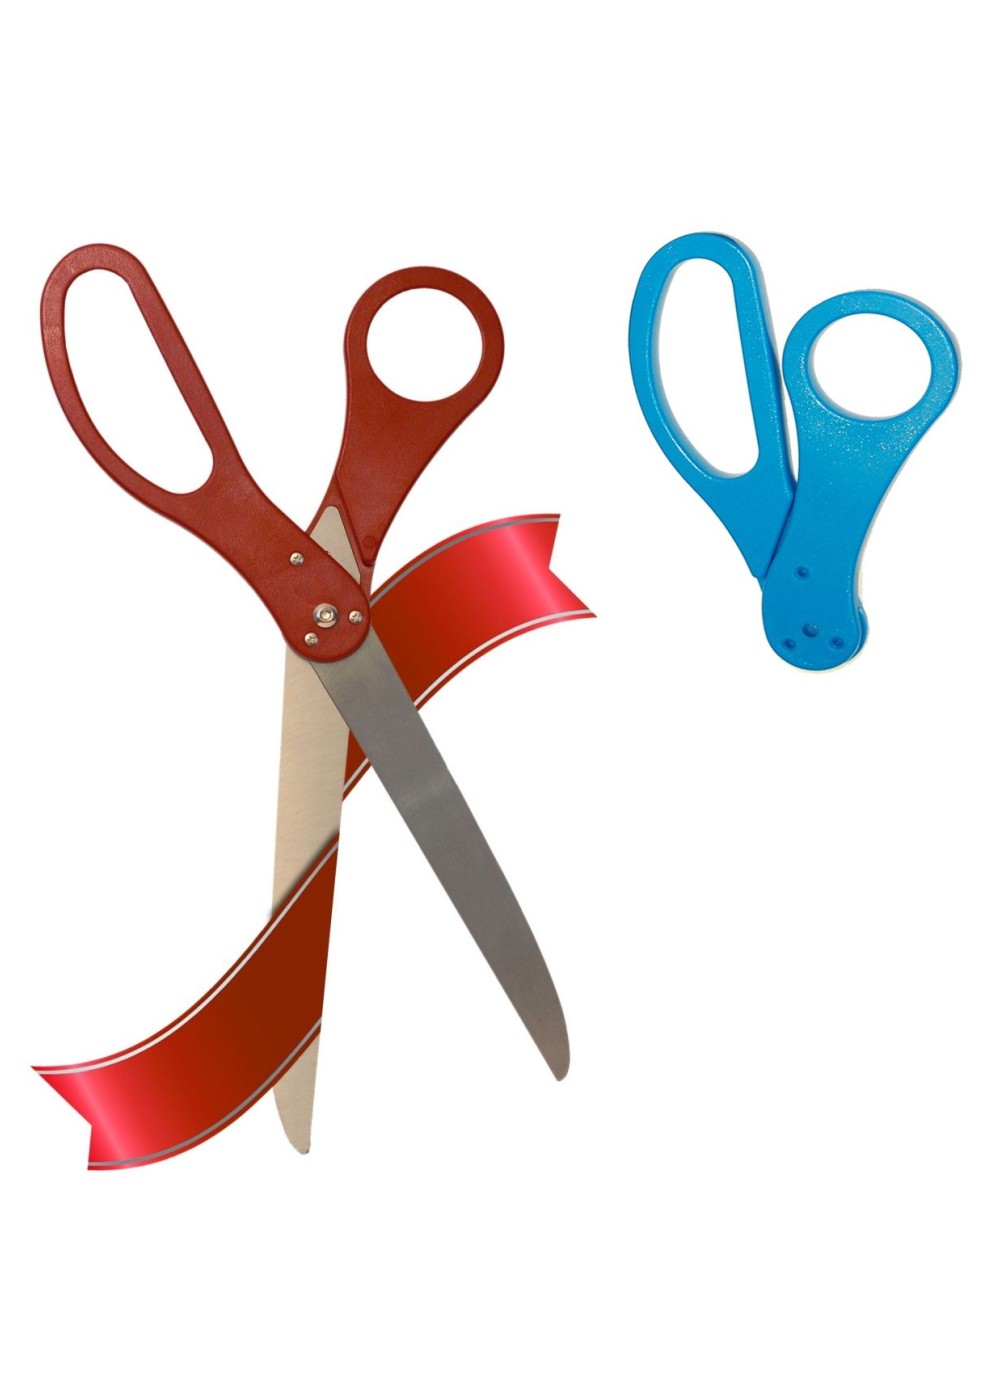 25 Inch Red Ribbon Cutting Scissors With Changeable Blue Handles